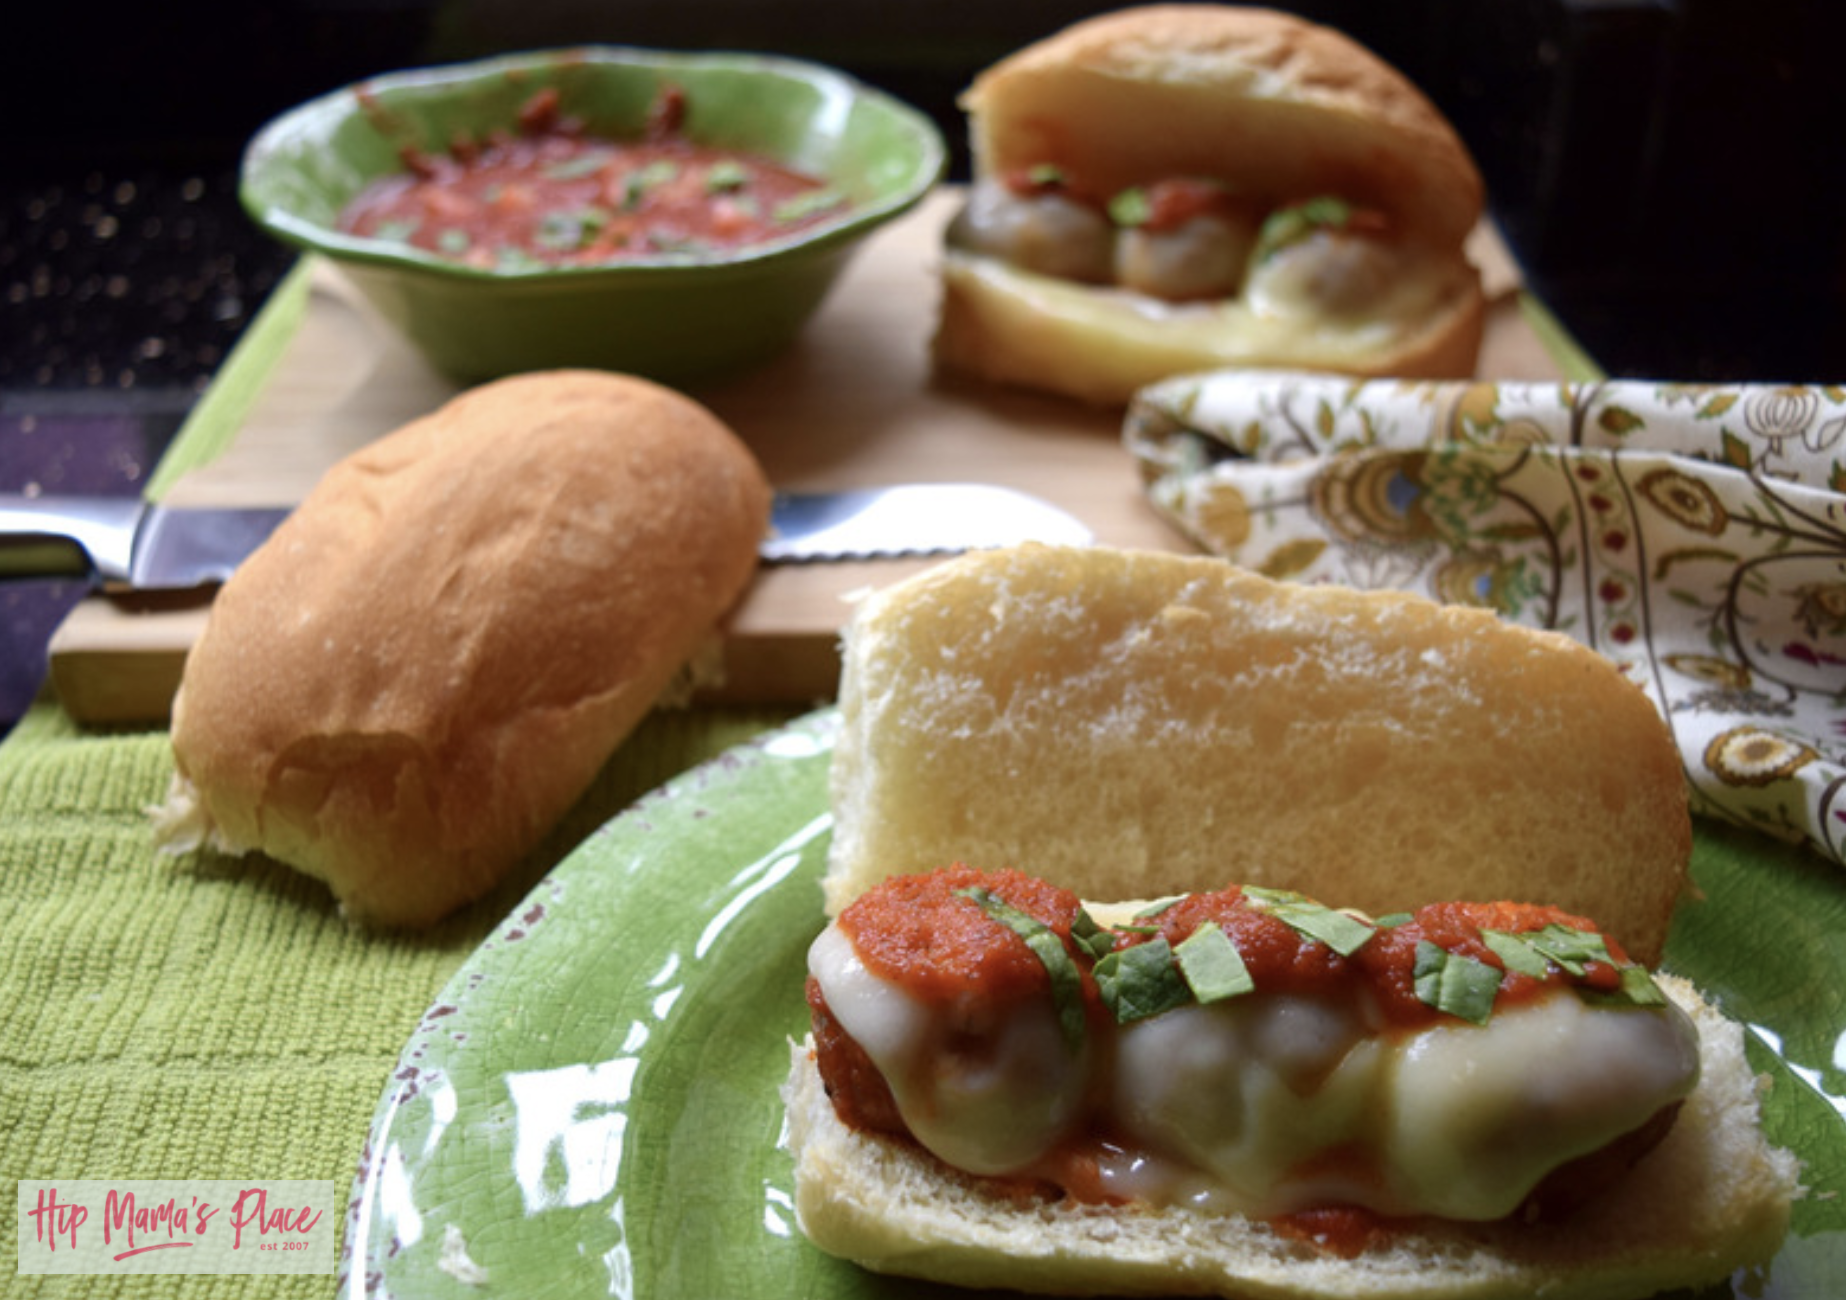 Simplify dinner tonight and make these Easy Italian Meatball Sandwiches made with Carando brand Abruzzese Recipe Italian Style Meatballs at Food Lion!